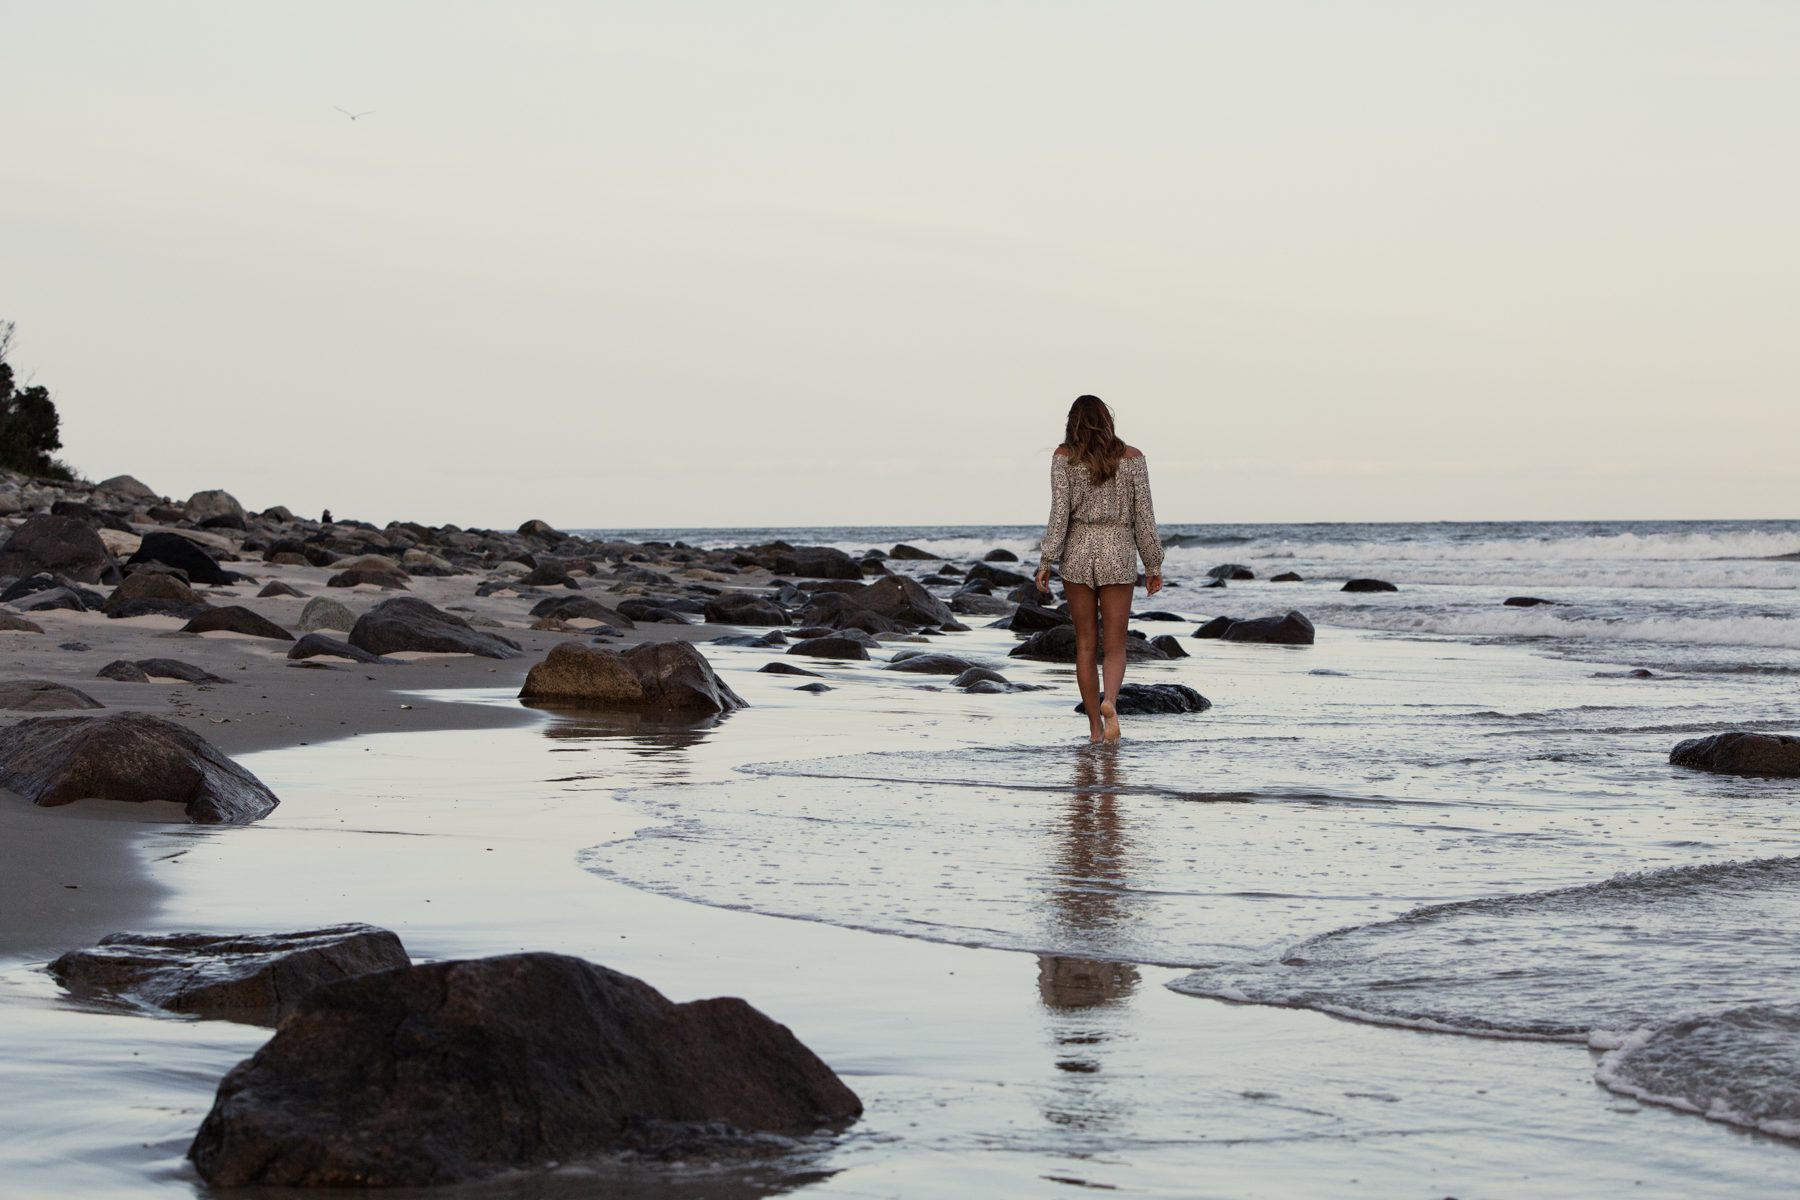 Girl walking at water's edge with rocks beach